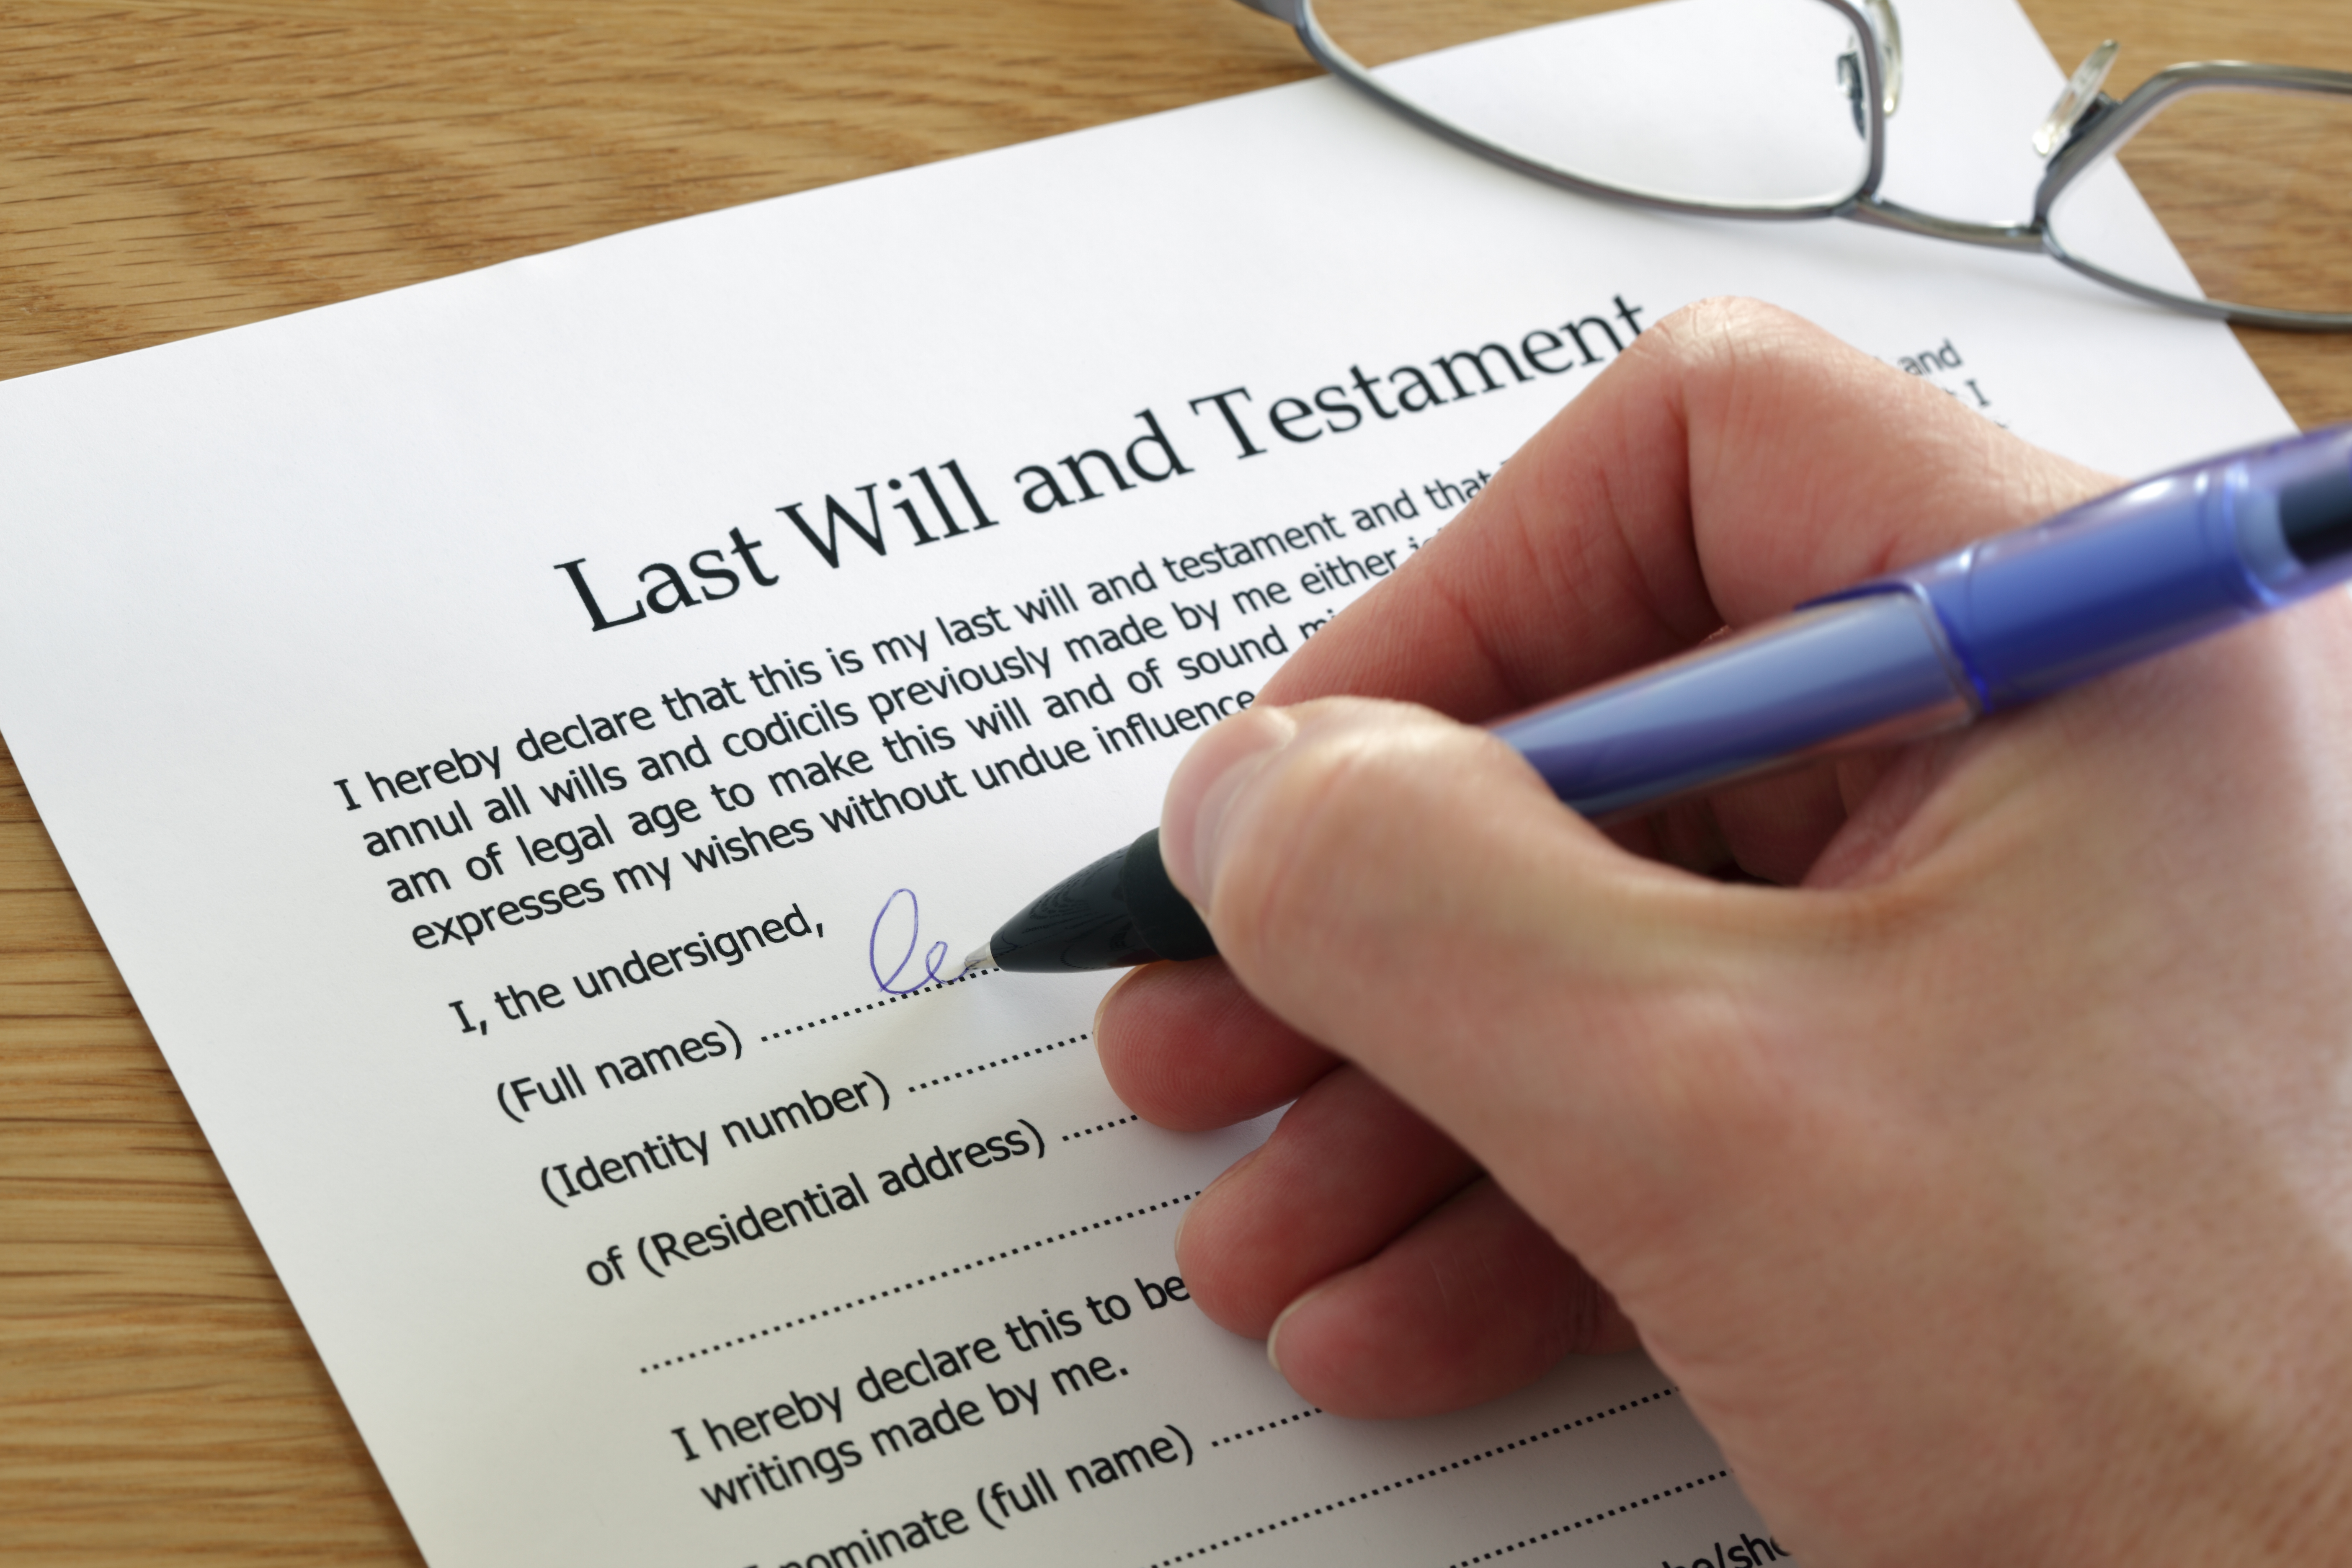 A person signing their last will | Source: Shutterstock